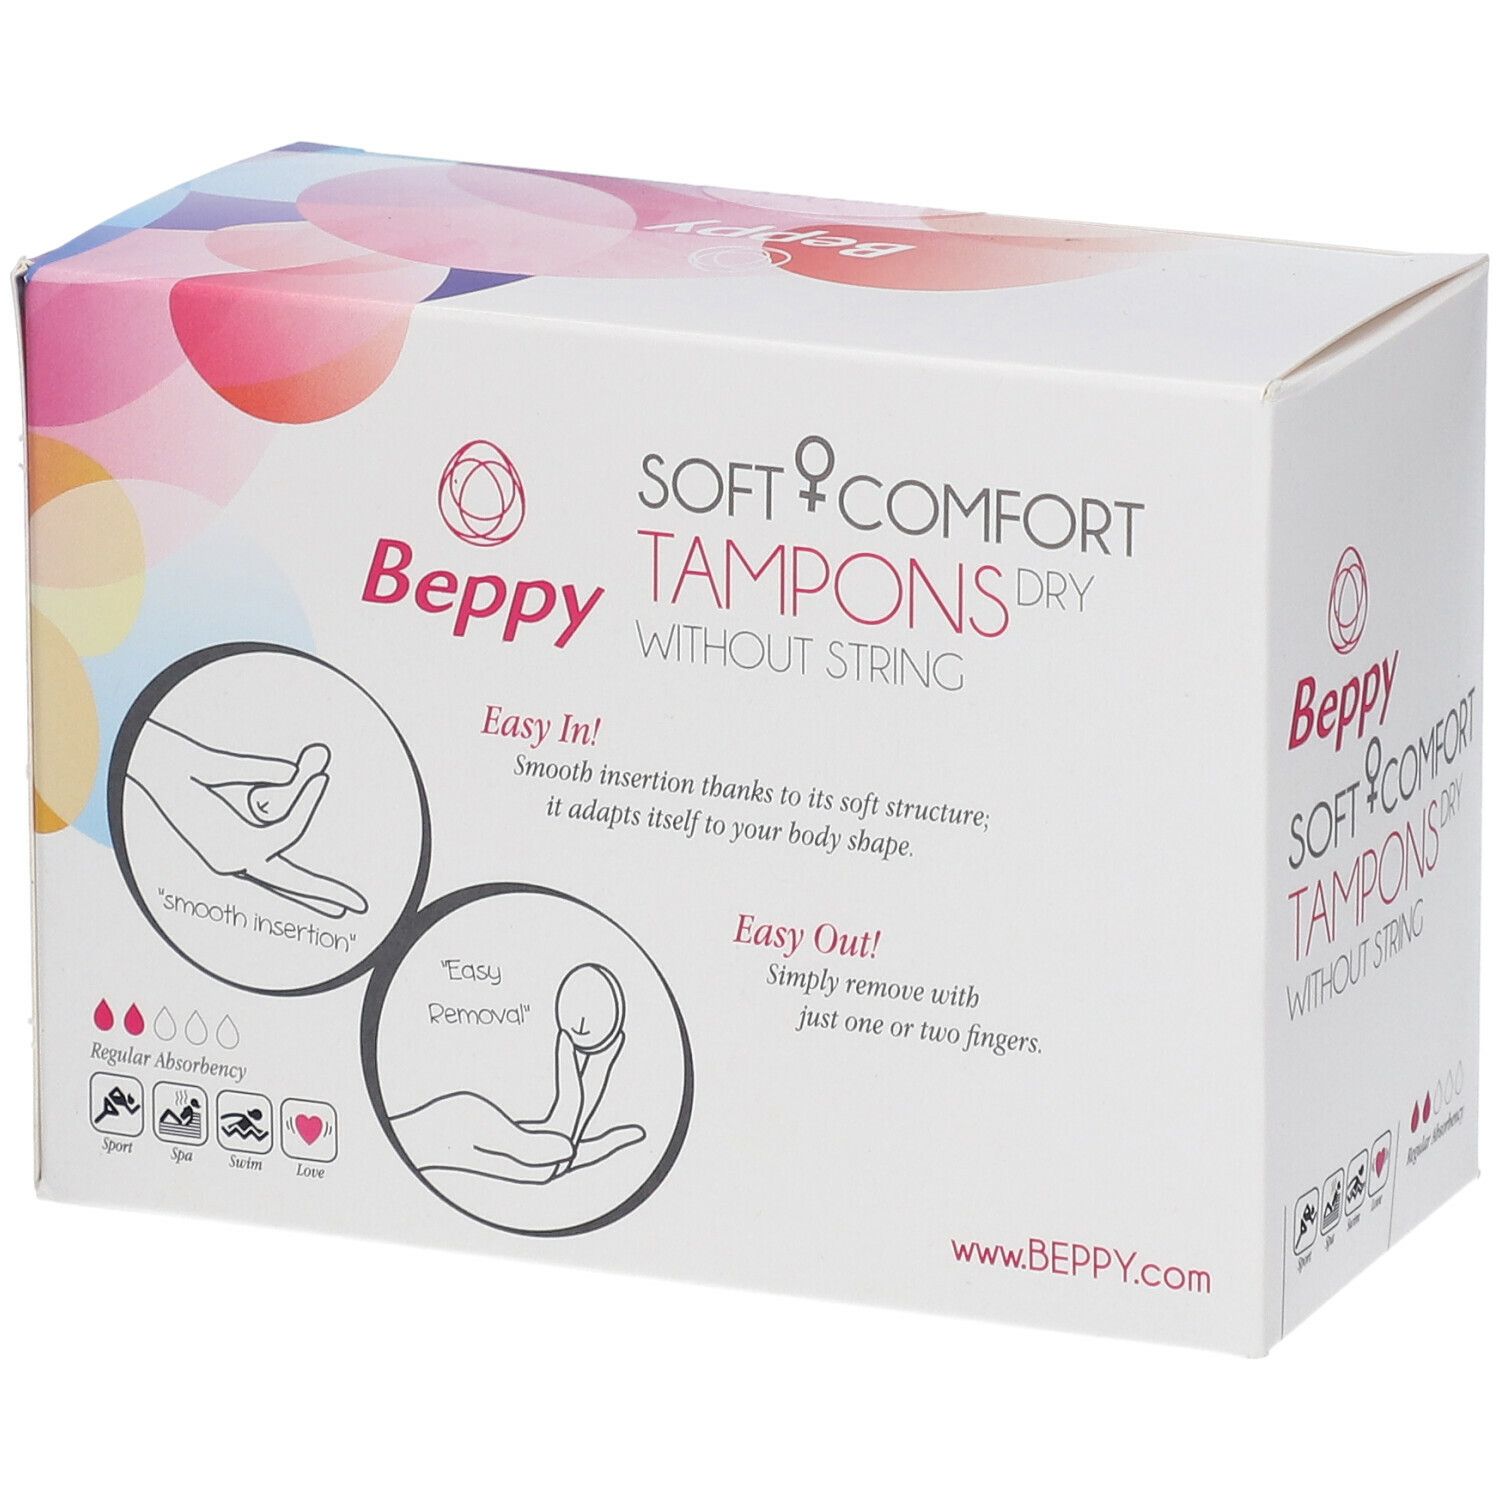 Beppy Action Tampon Classic